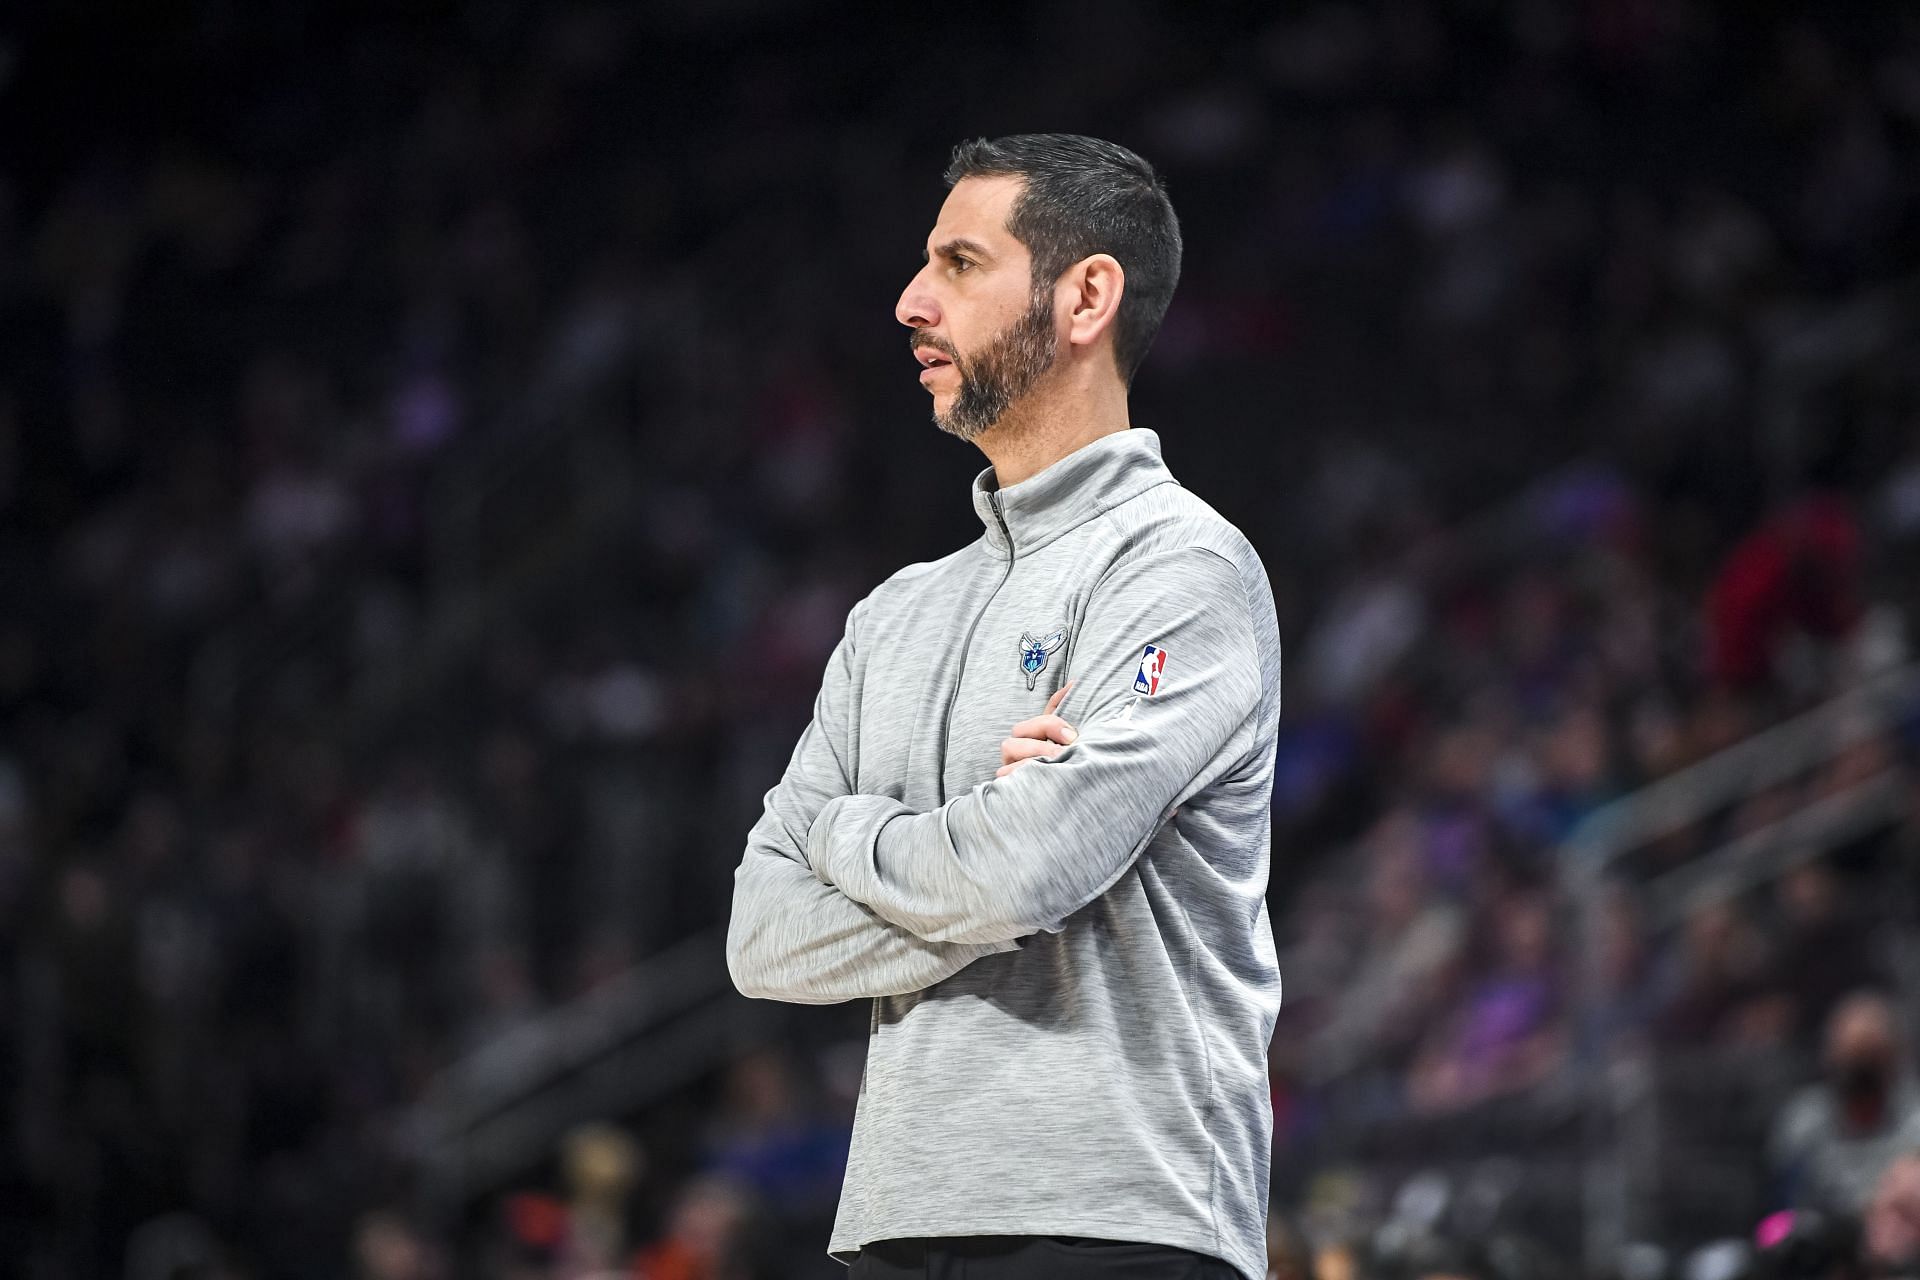 James Borrego of the Charlotte Hornets looks on during a game against the Detroit Pistons on Feb. 11 in Detroit, Michigan.